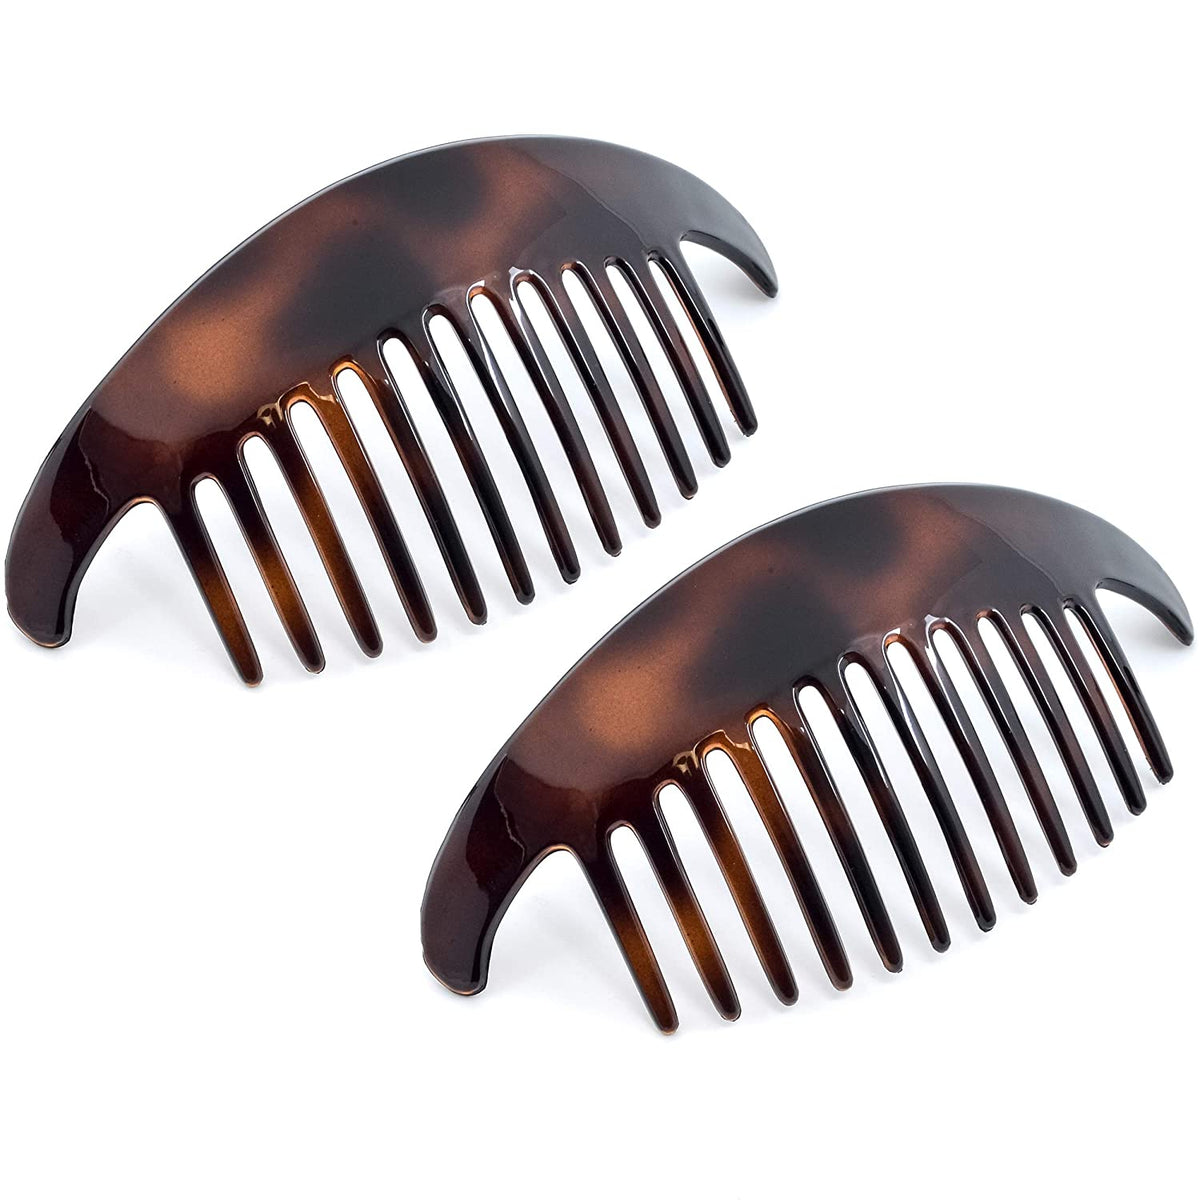 Must Have Side Combs X2 by Plain Jane Ladies Hair Combs Tortoiseshell Hair  Comb Acrylic French Hair Combs Black Hair Combs 